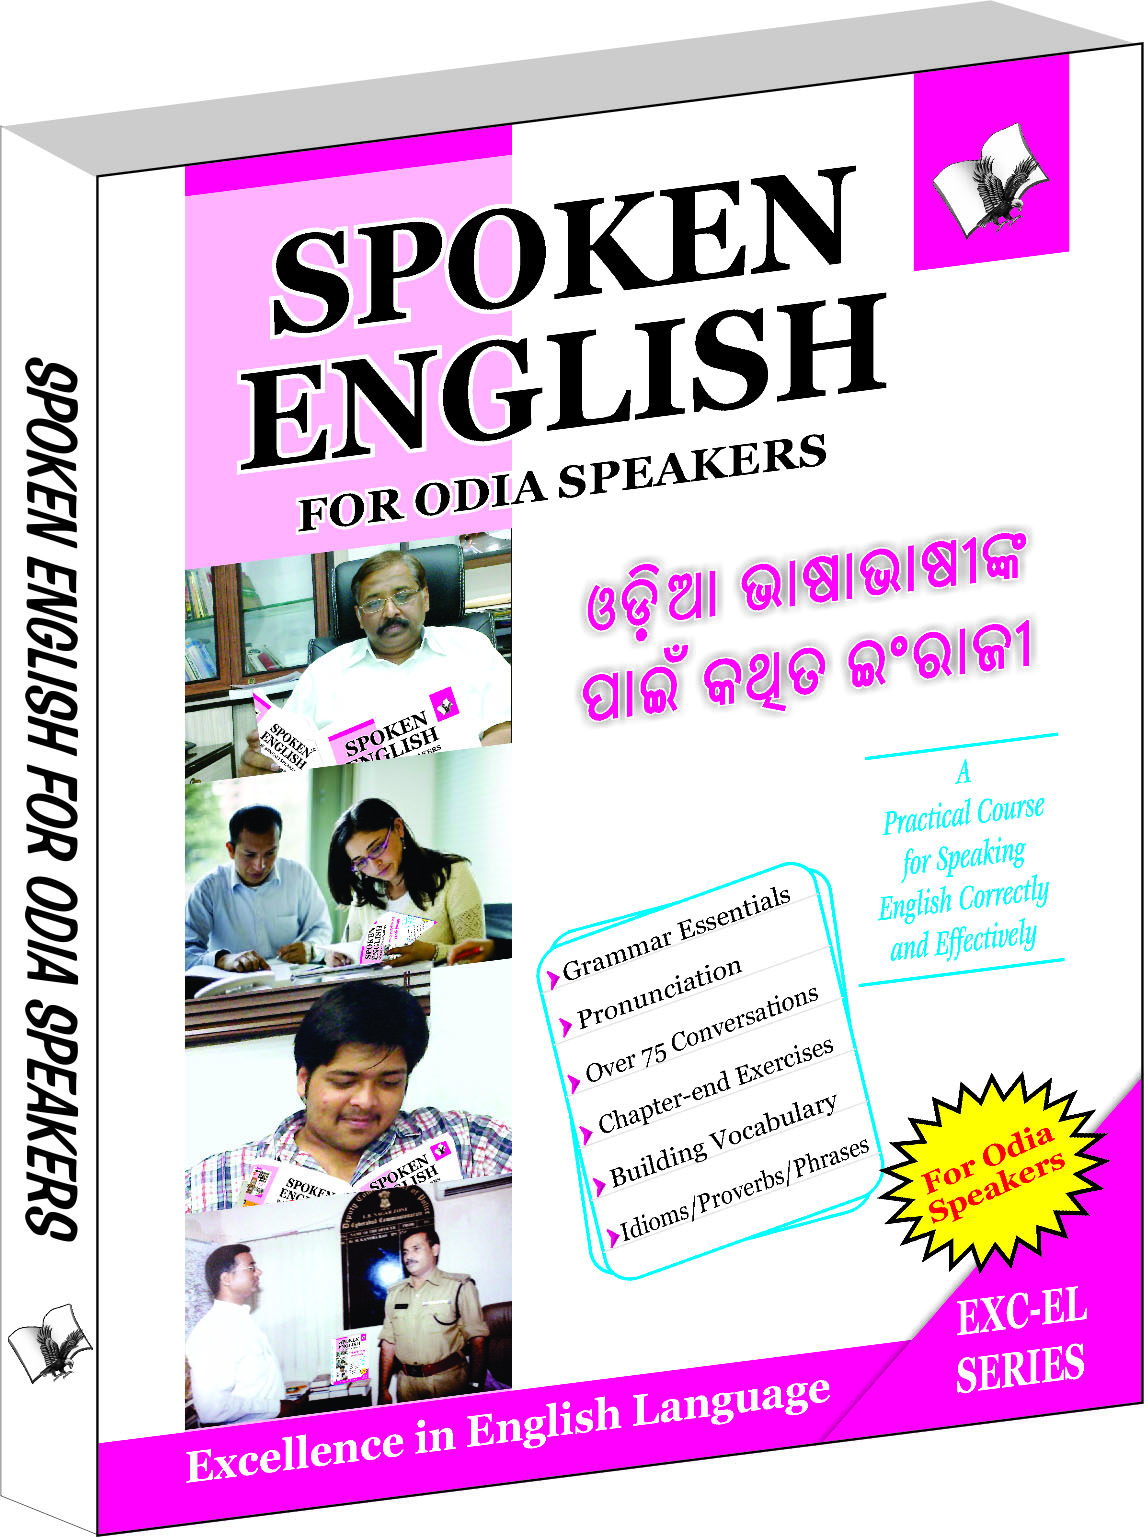 Spoken English For Odia Speakers-How to convey your ideas in English at home, market & business for Odiya speakers